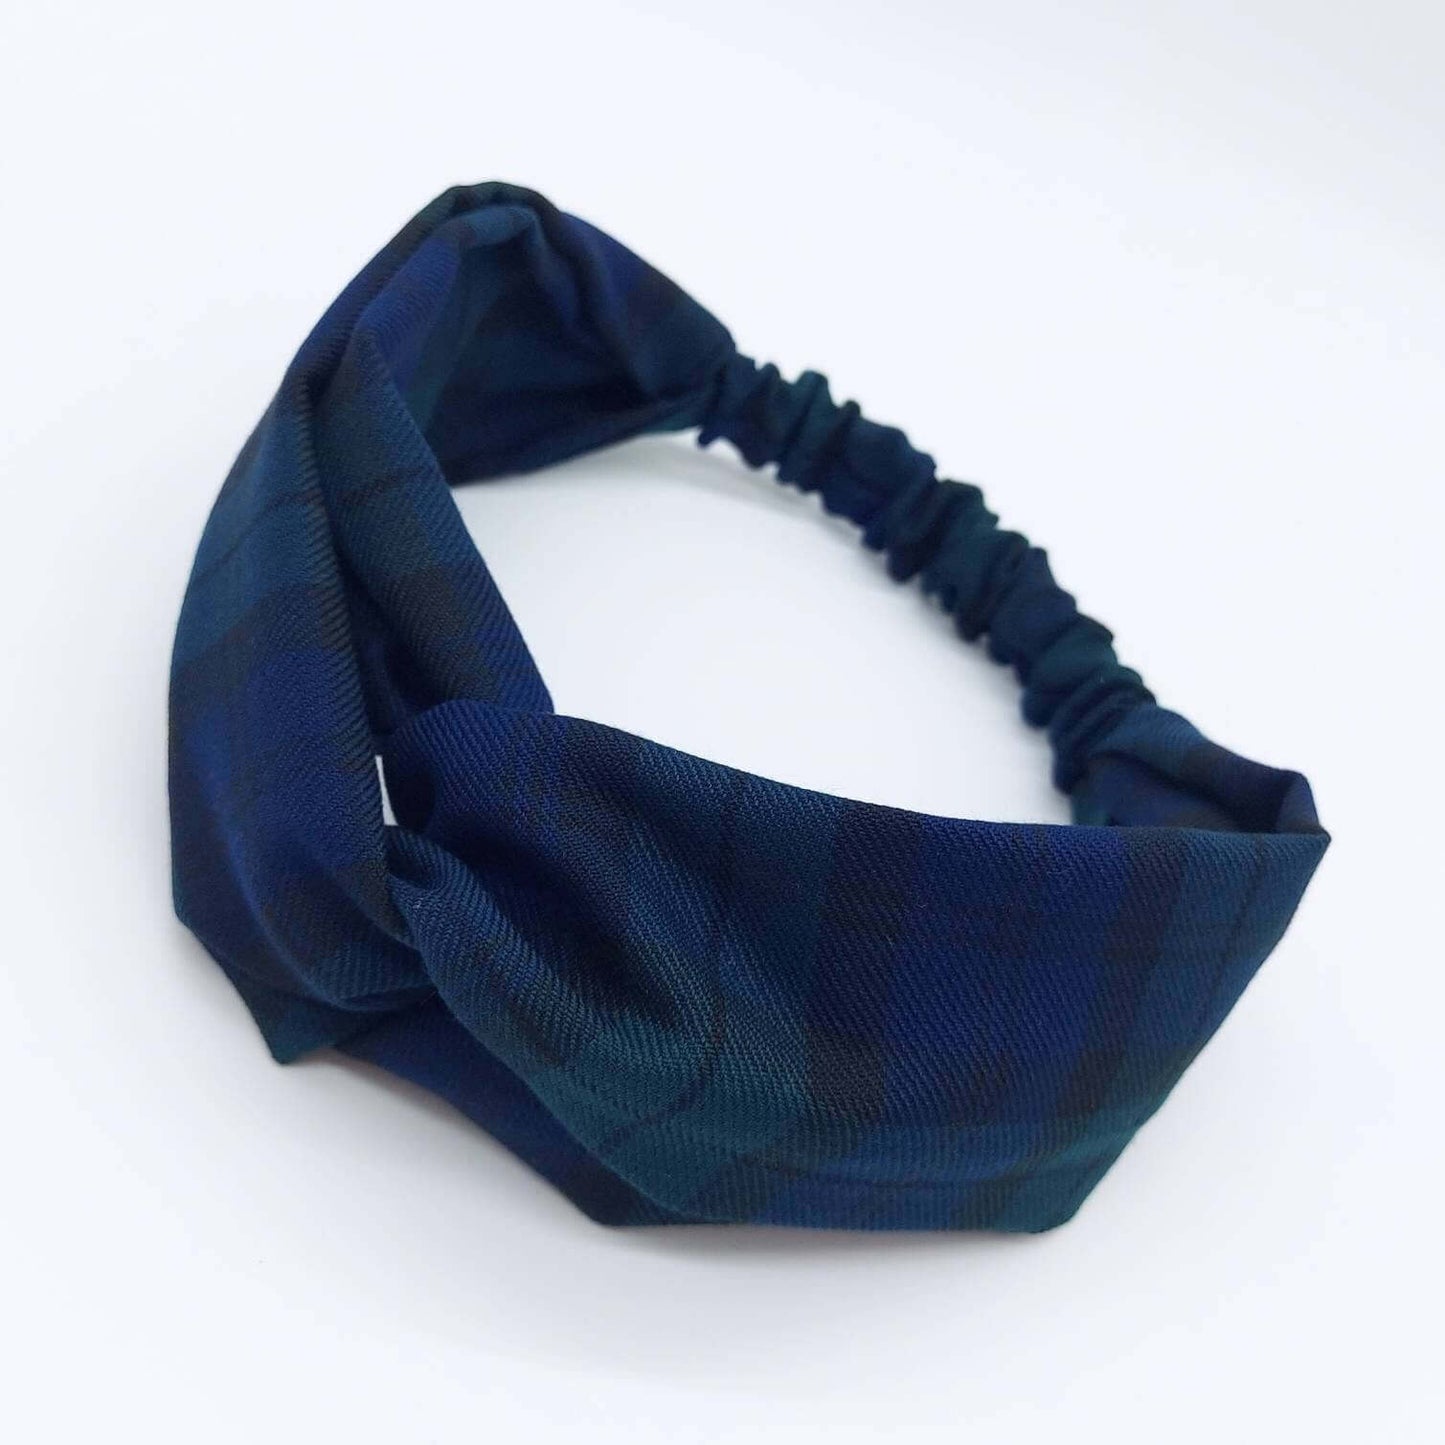 A soft, black and blue plaid tartan check, elasticated fabric headband, with a turban twist design at the front.